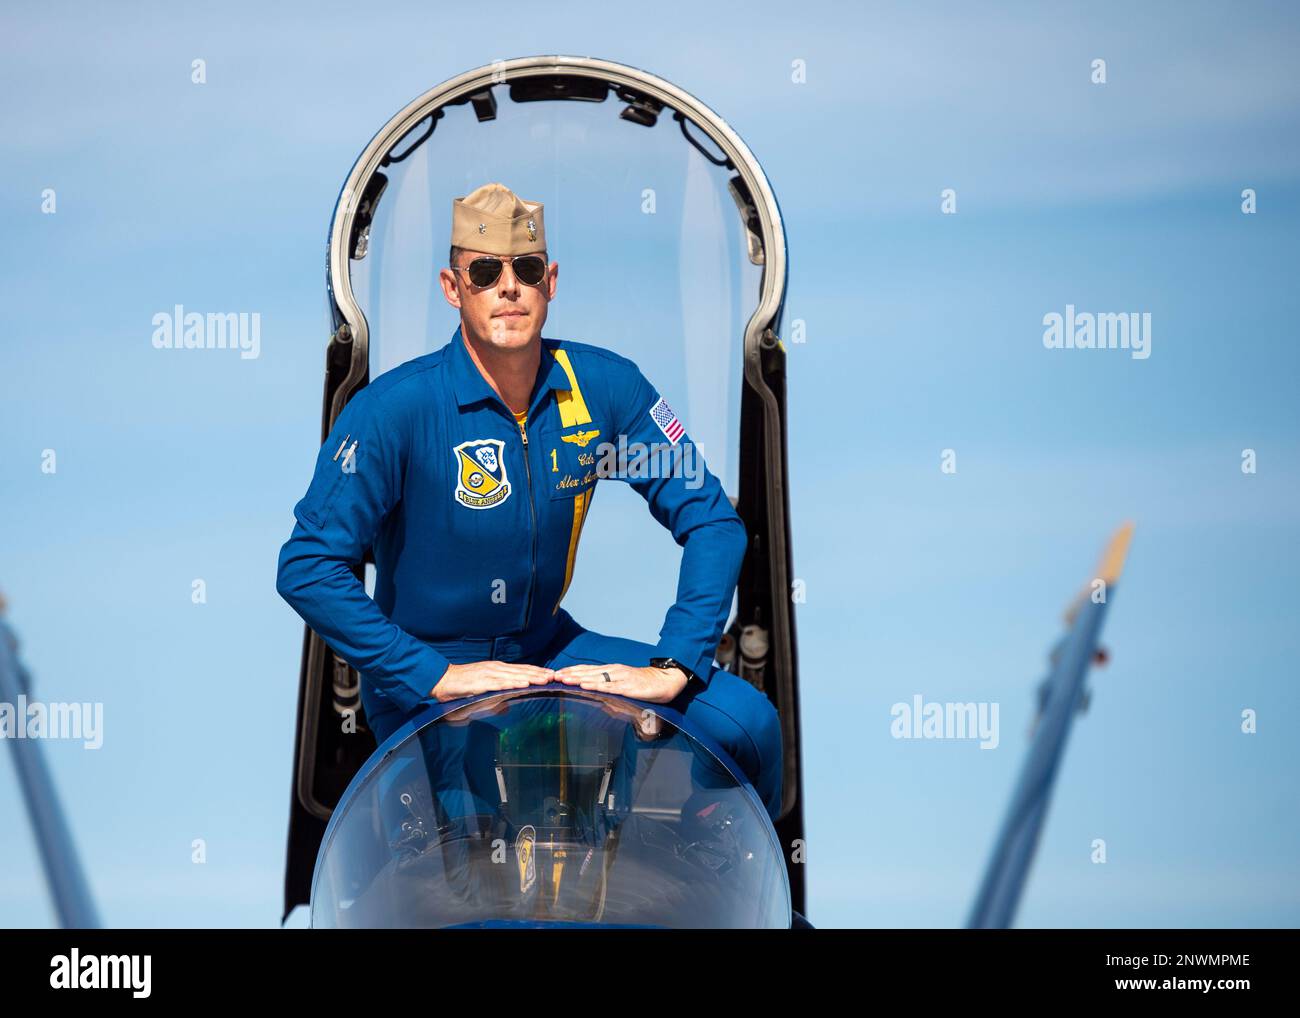 Cmdr. Alex Armatas, commanding officer and flight leader of the U.S. Navy Flight Demonstration Squadron, the Blue Angels, exits his aircraft after landing at Naval Air Facility (NAF) El Centro. The Blue Angels are currently conducting winter training at NAF El Centro, California, in preparation for the upcoming 2023 air show season. Stock Photo